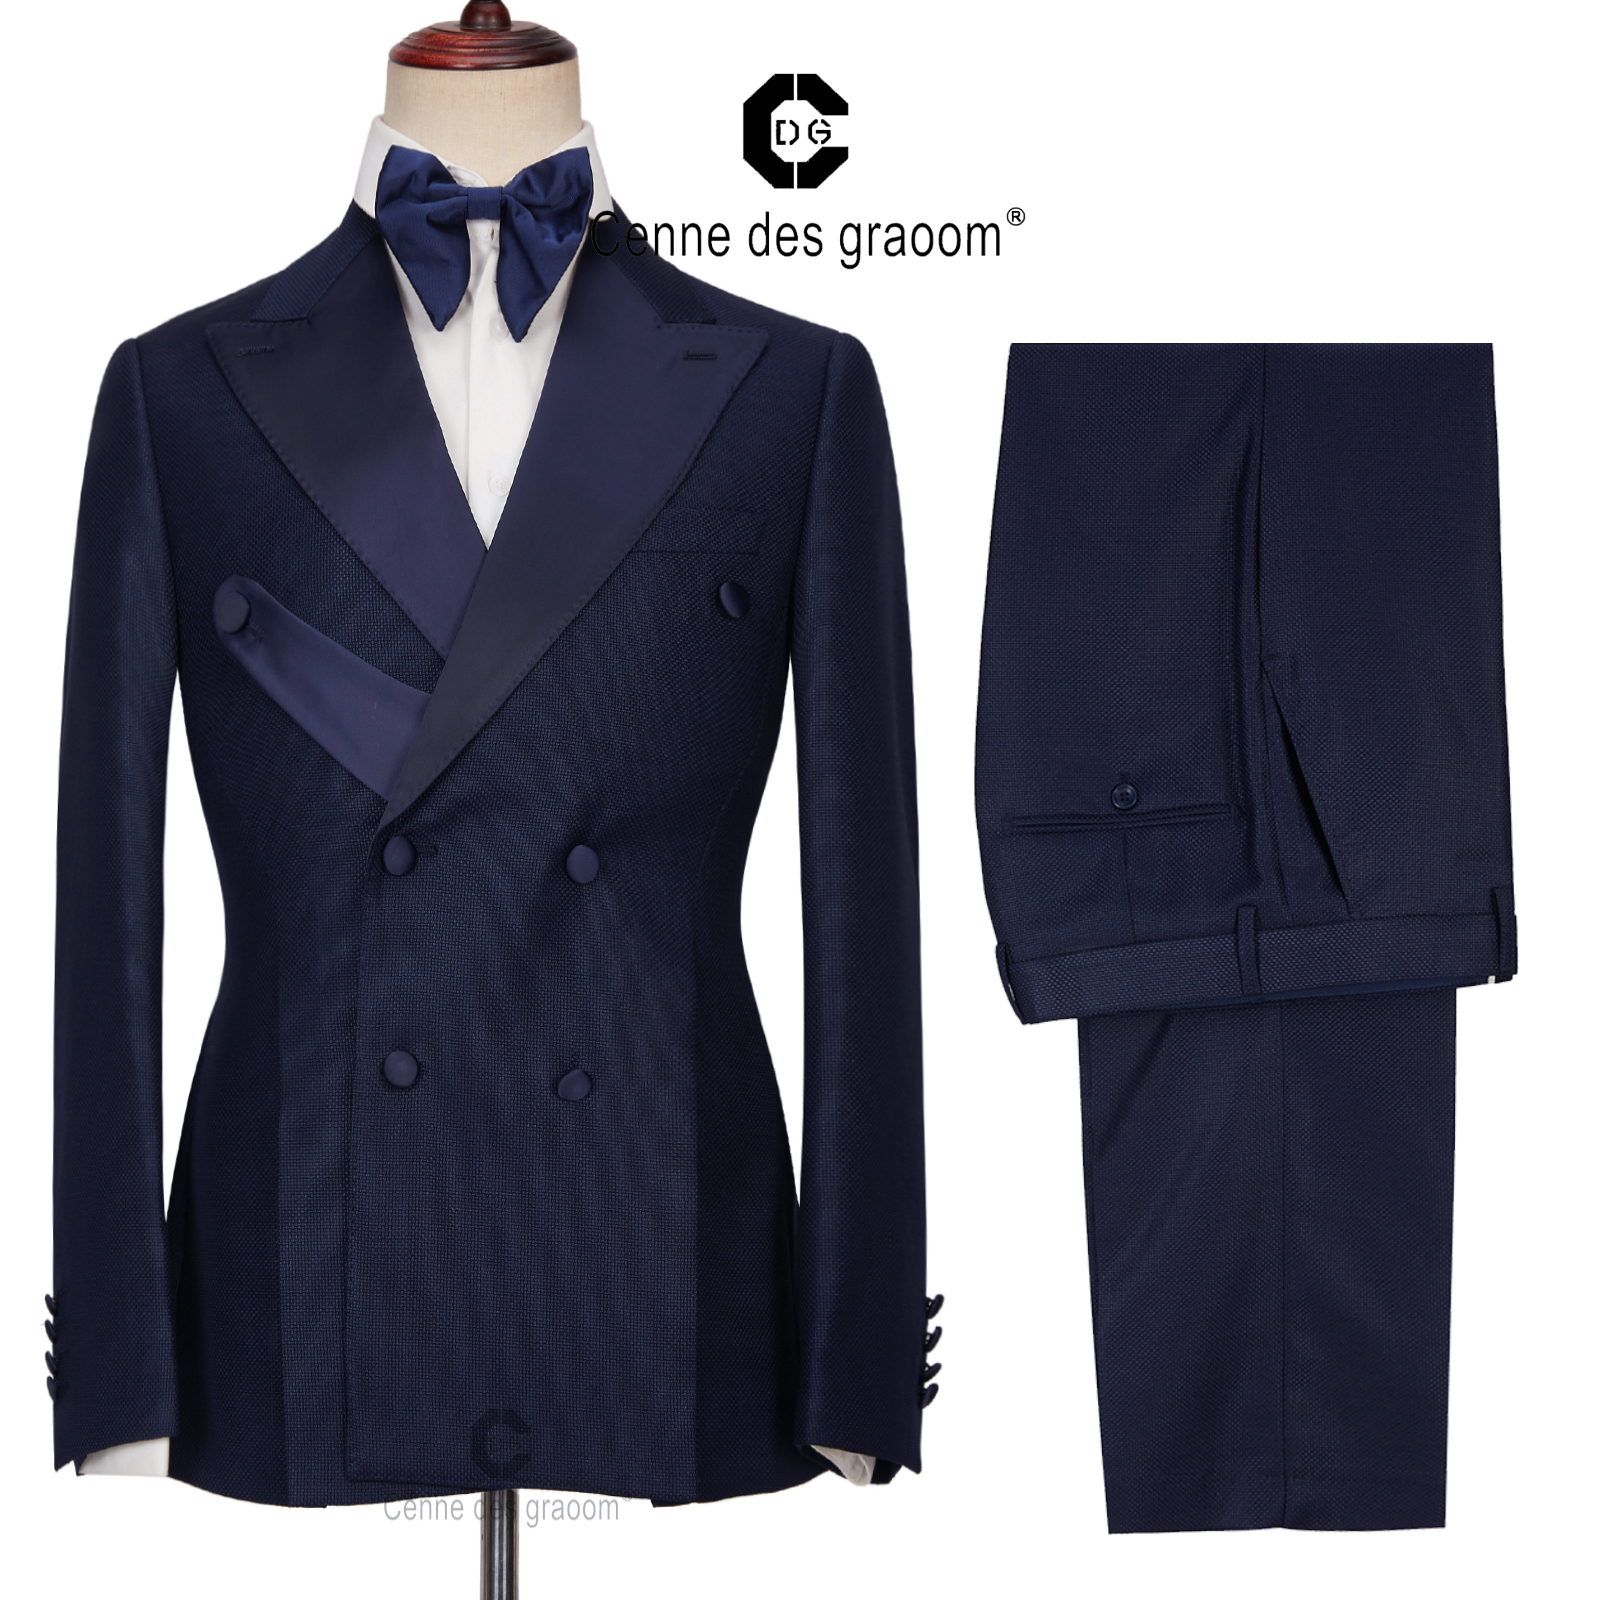 Cenne-Des-Graoom-New-Men-Suits-Tailor-Made-Tuxedo-Double-Breasted-Blazers-Pants-For-Party-Singer.jpg